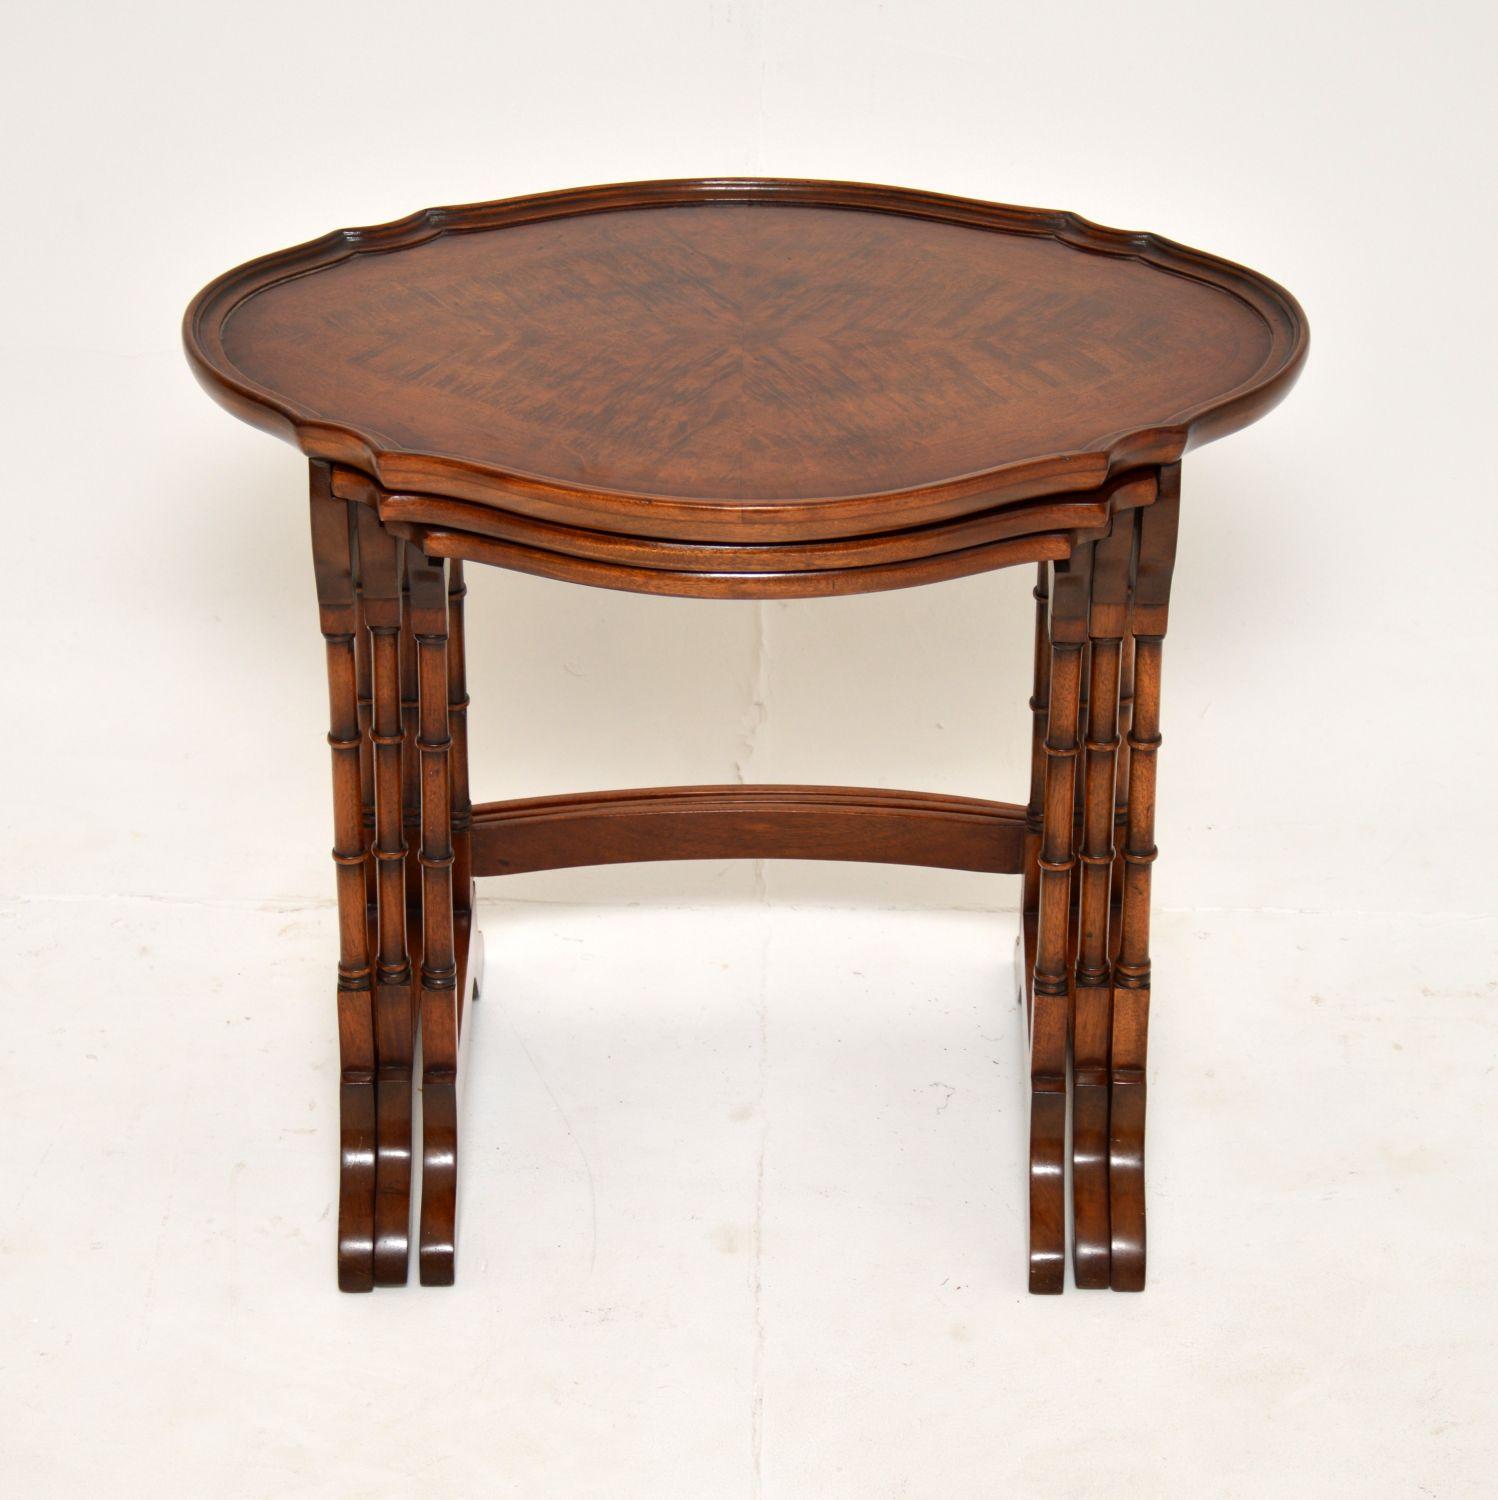 A wonderful antique walnut pie crust nest of tables. These were made in England, they date from around the 1900-1920 period.

They are of the utmost quality, the larger table has a pie crust top edge. All the tops have beautiful cross banded edges,